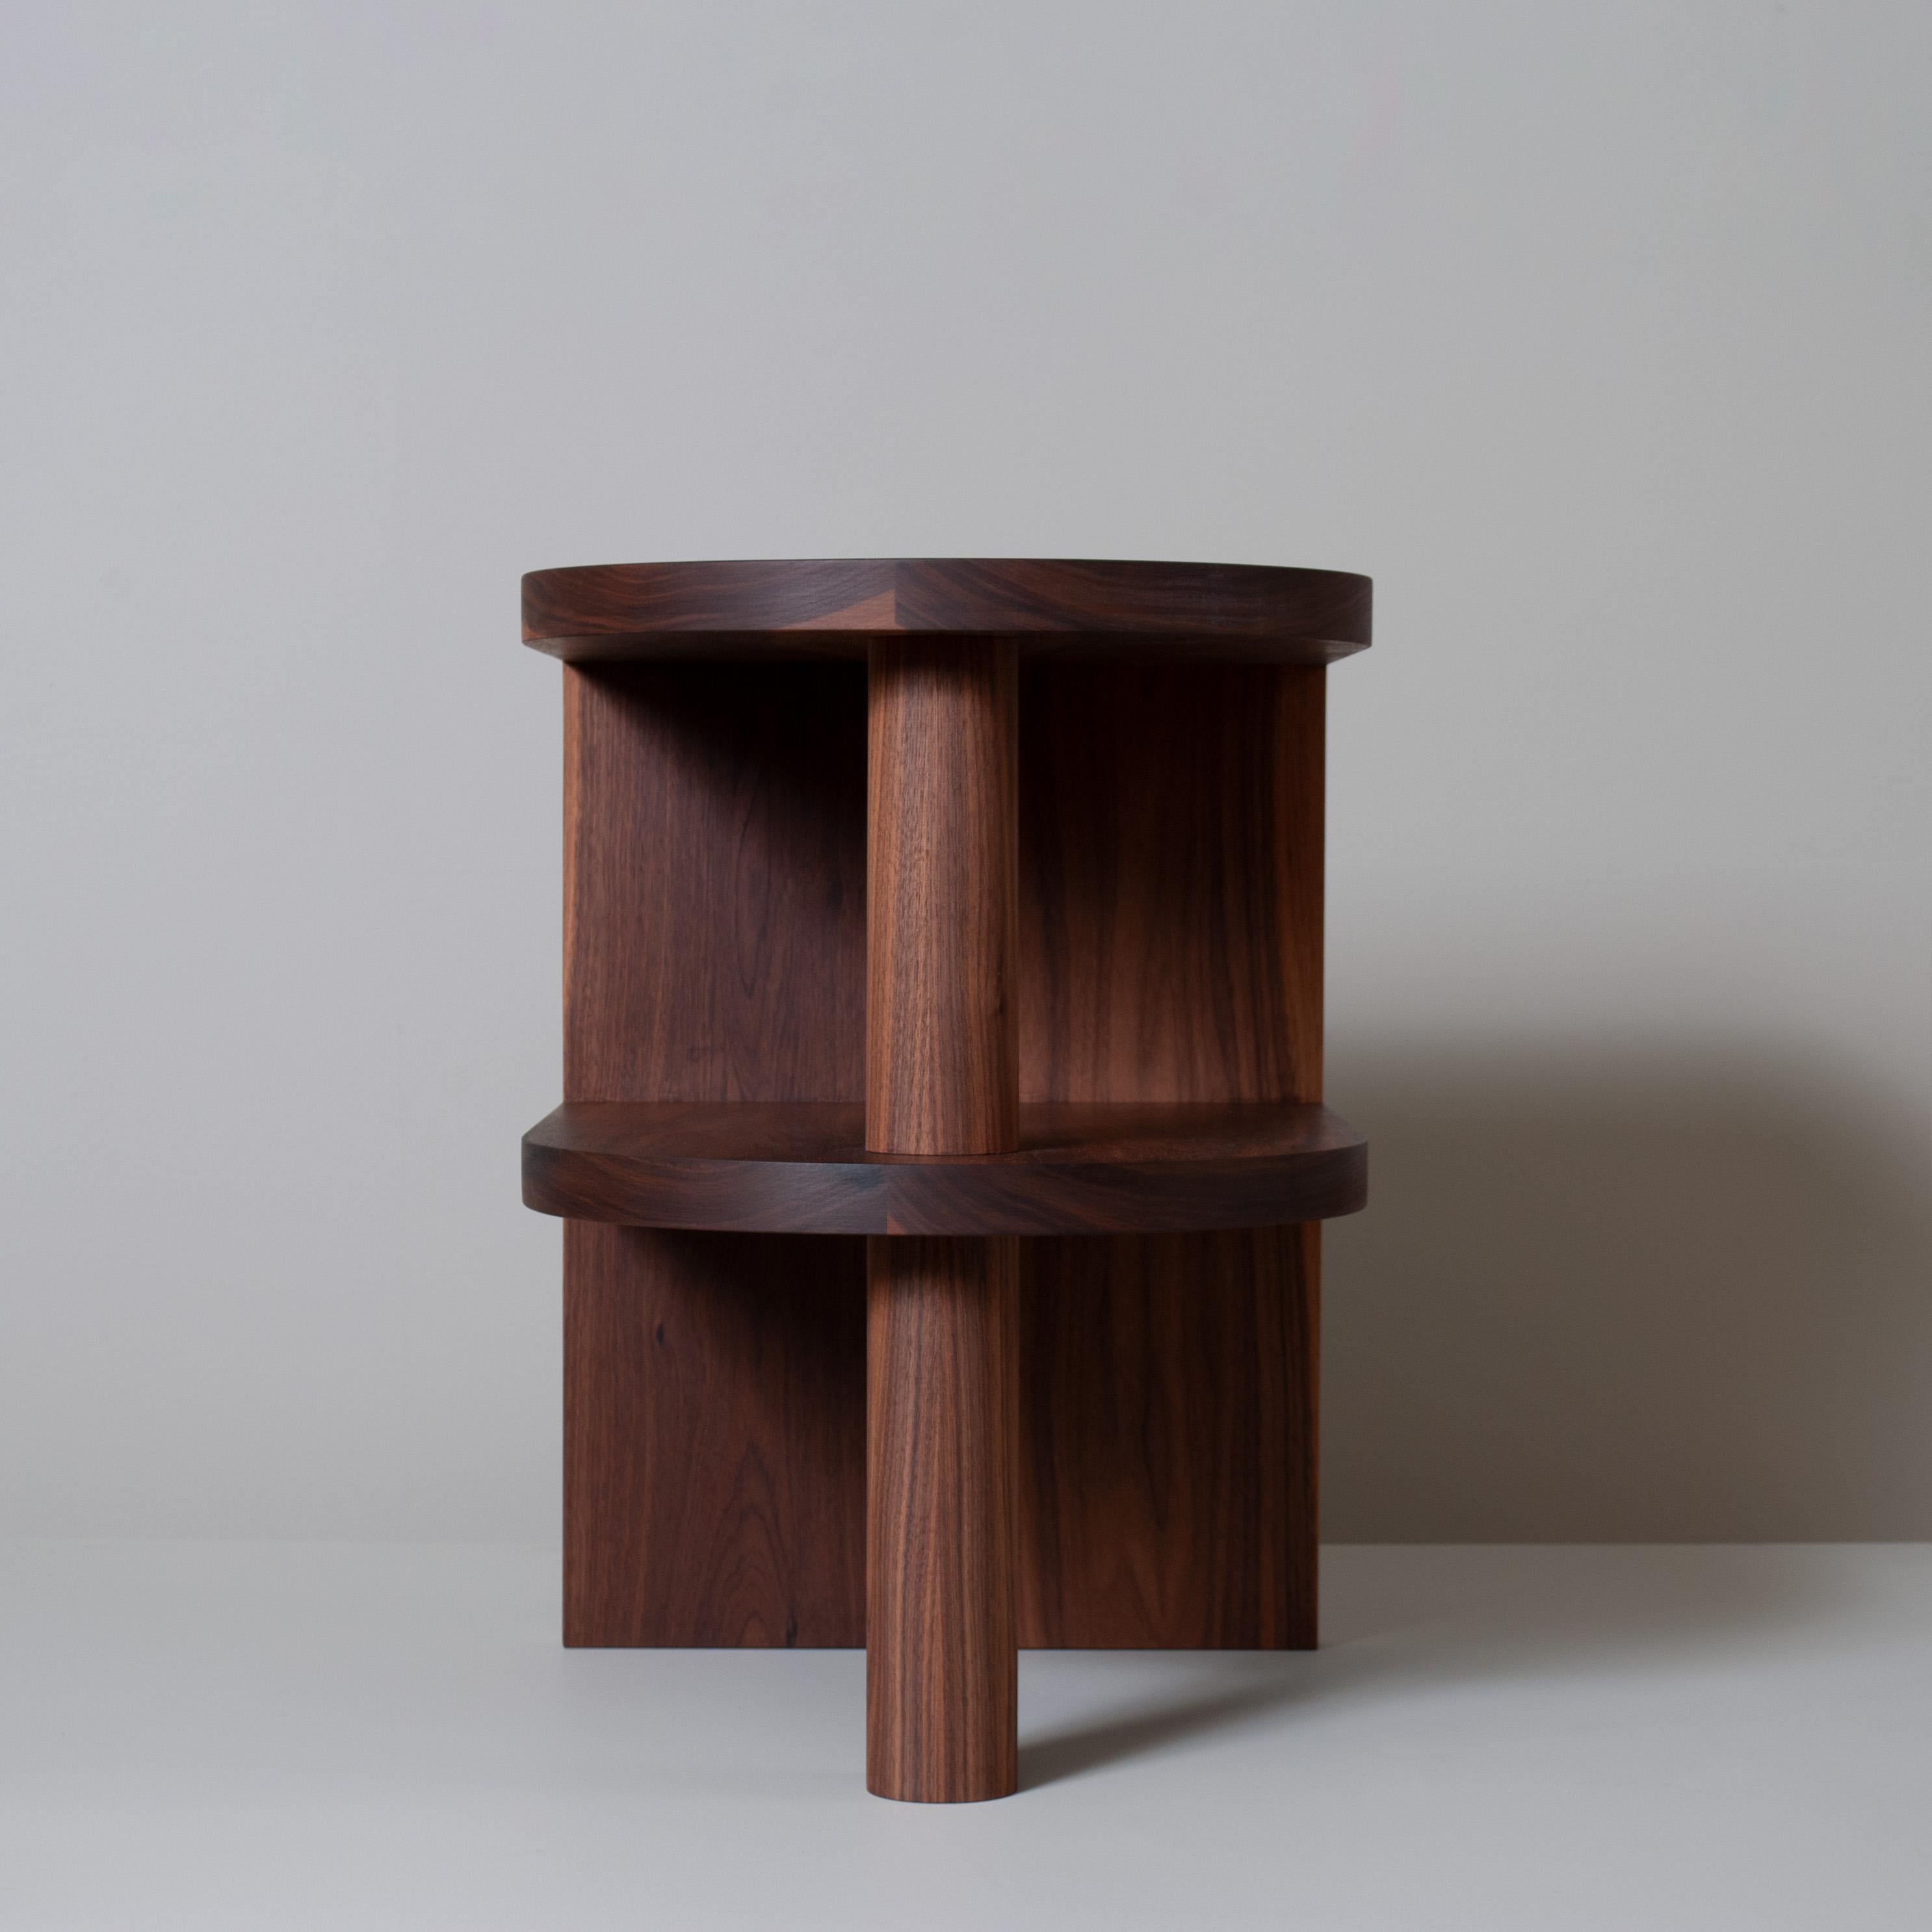 English Handcrafted Architectural Walnut Side Table For Sale